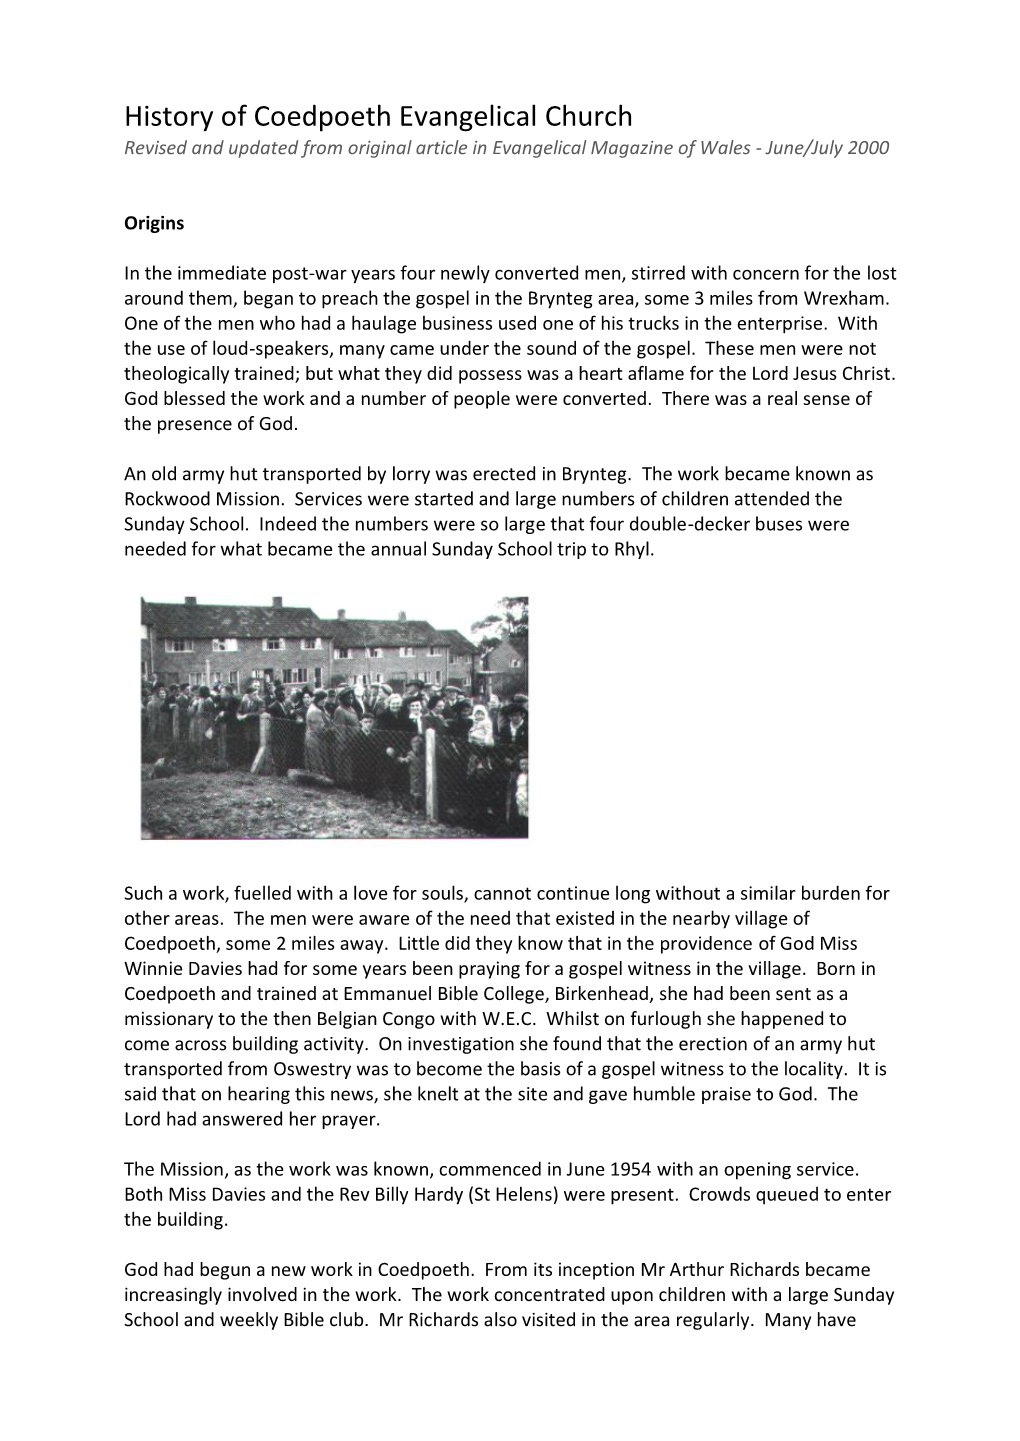 History of Coedpoeth Evangelical Church Revised and Updated from Original Article in Evangelical Magazine of Wales - June/July 2000